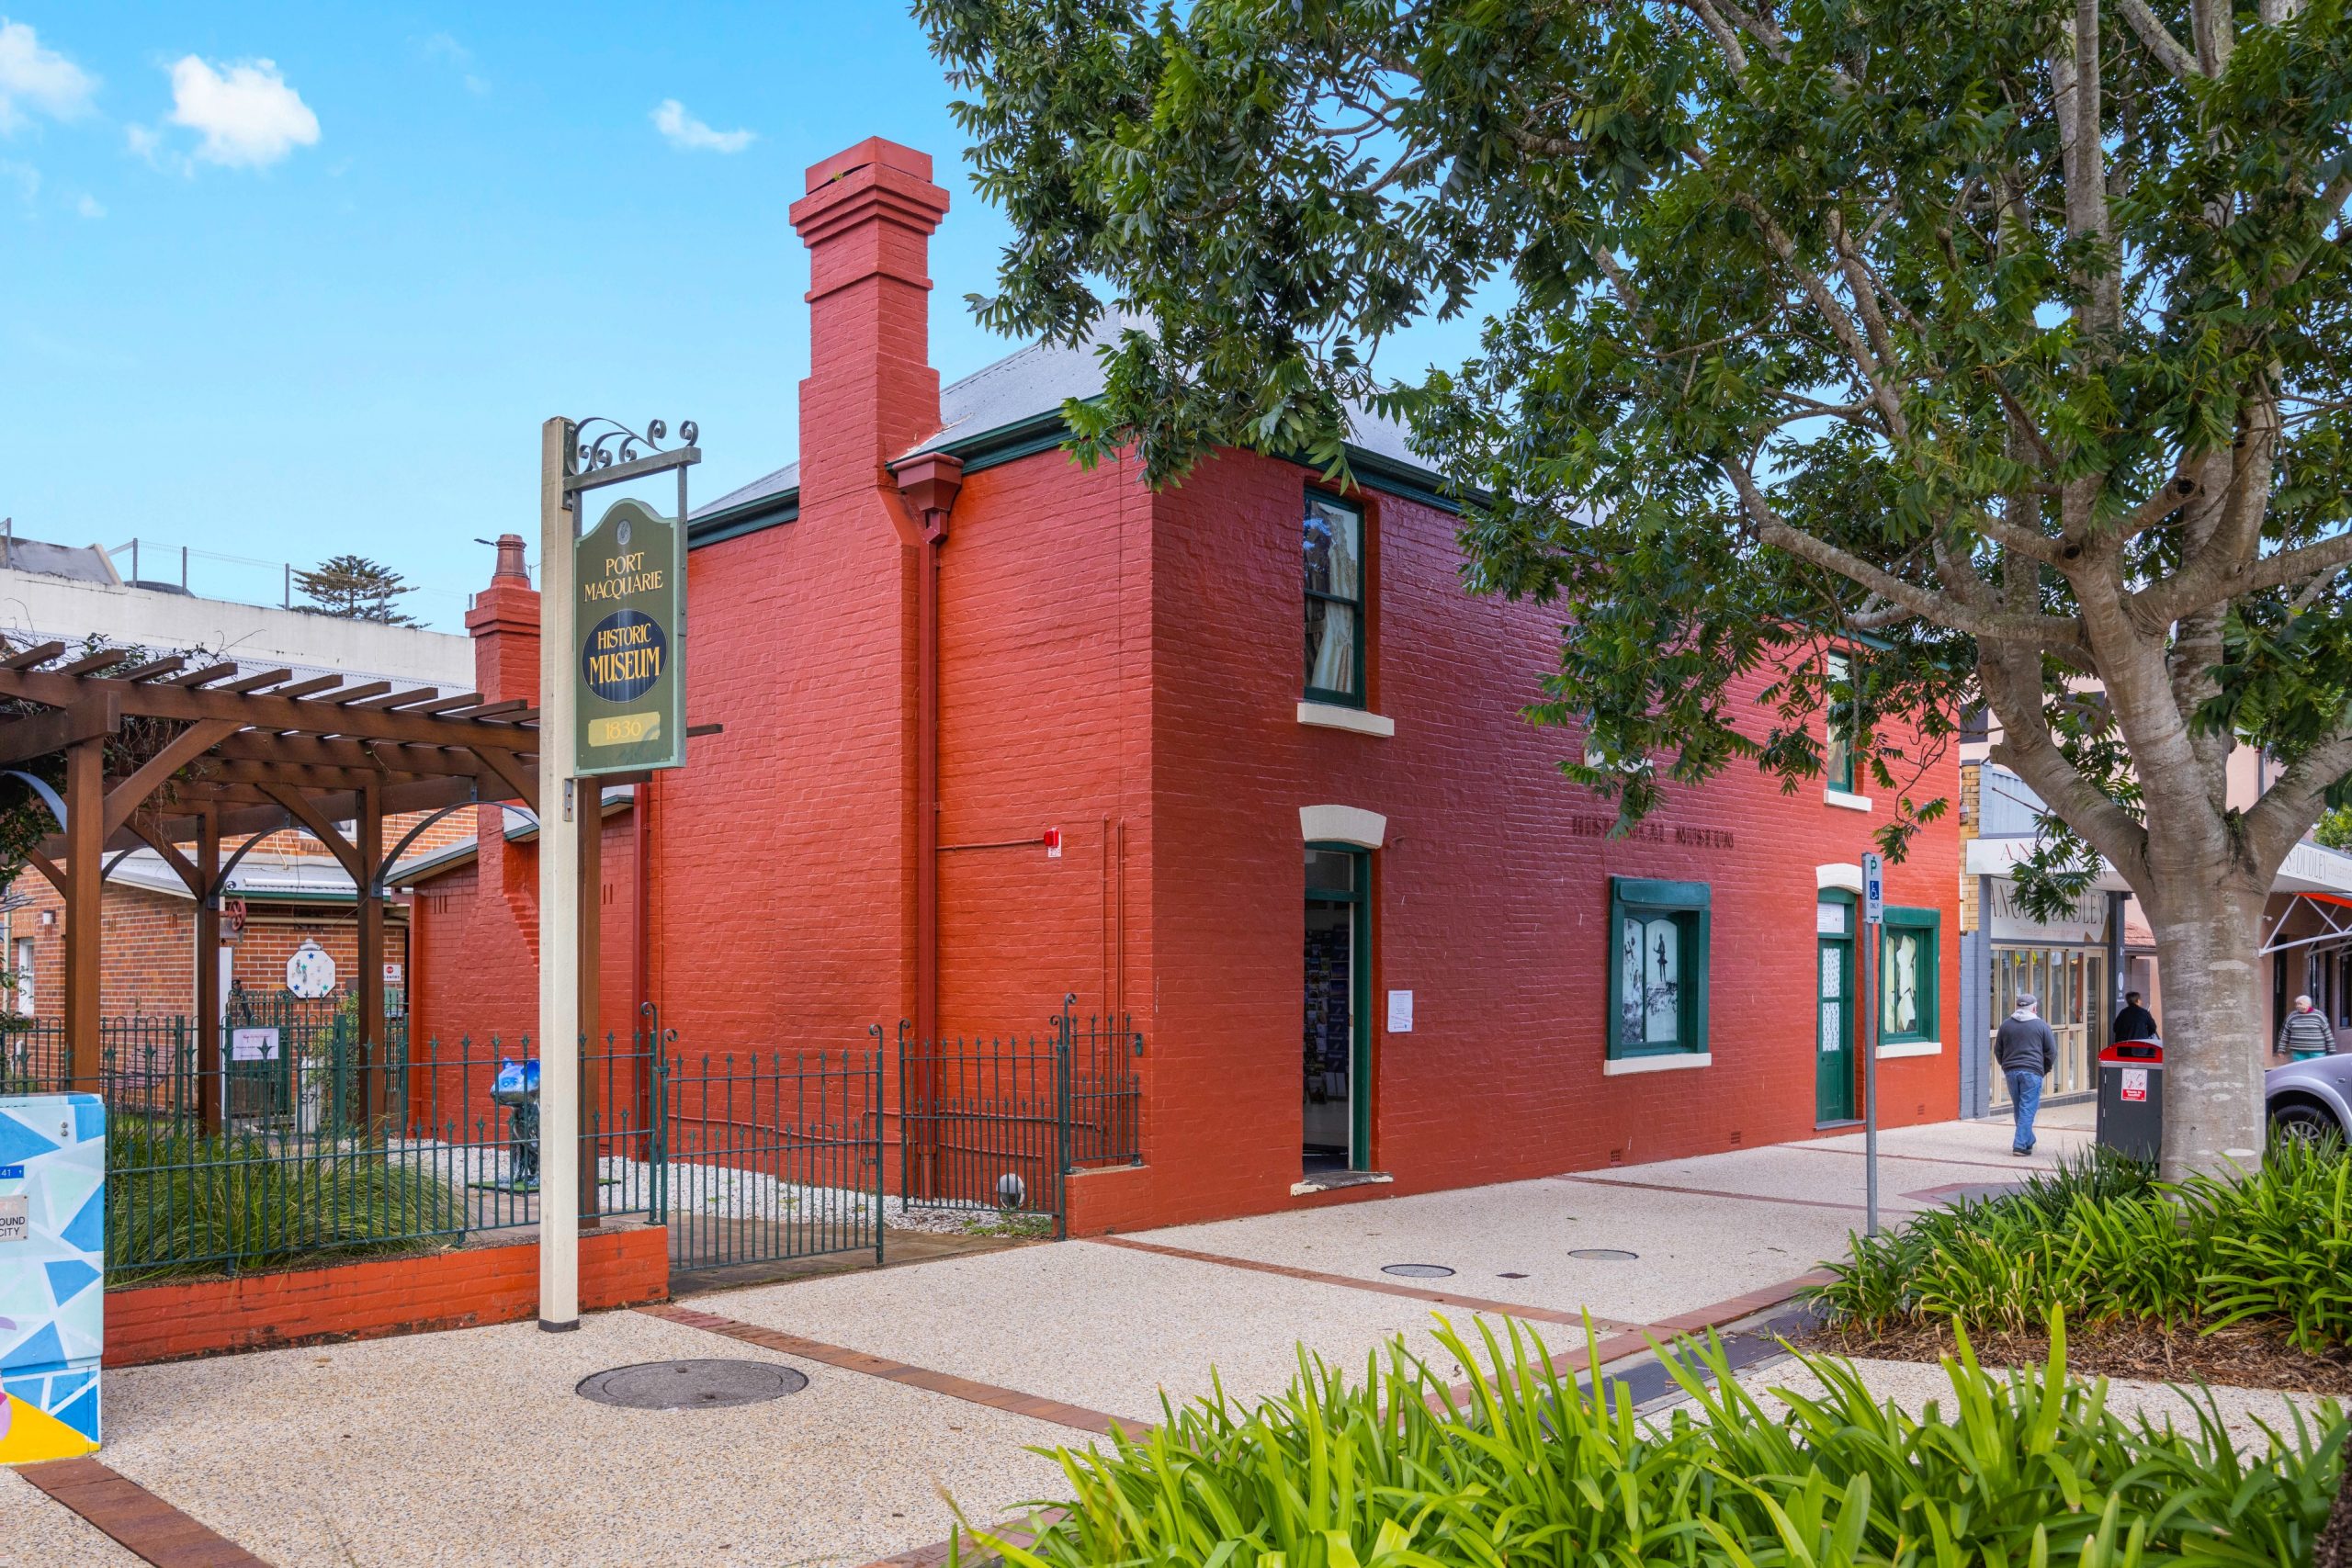 Brick building painted entirely bright red with dark green details